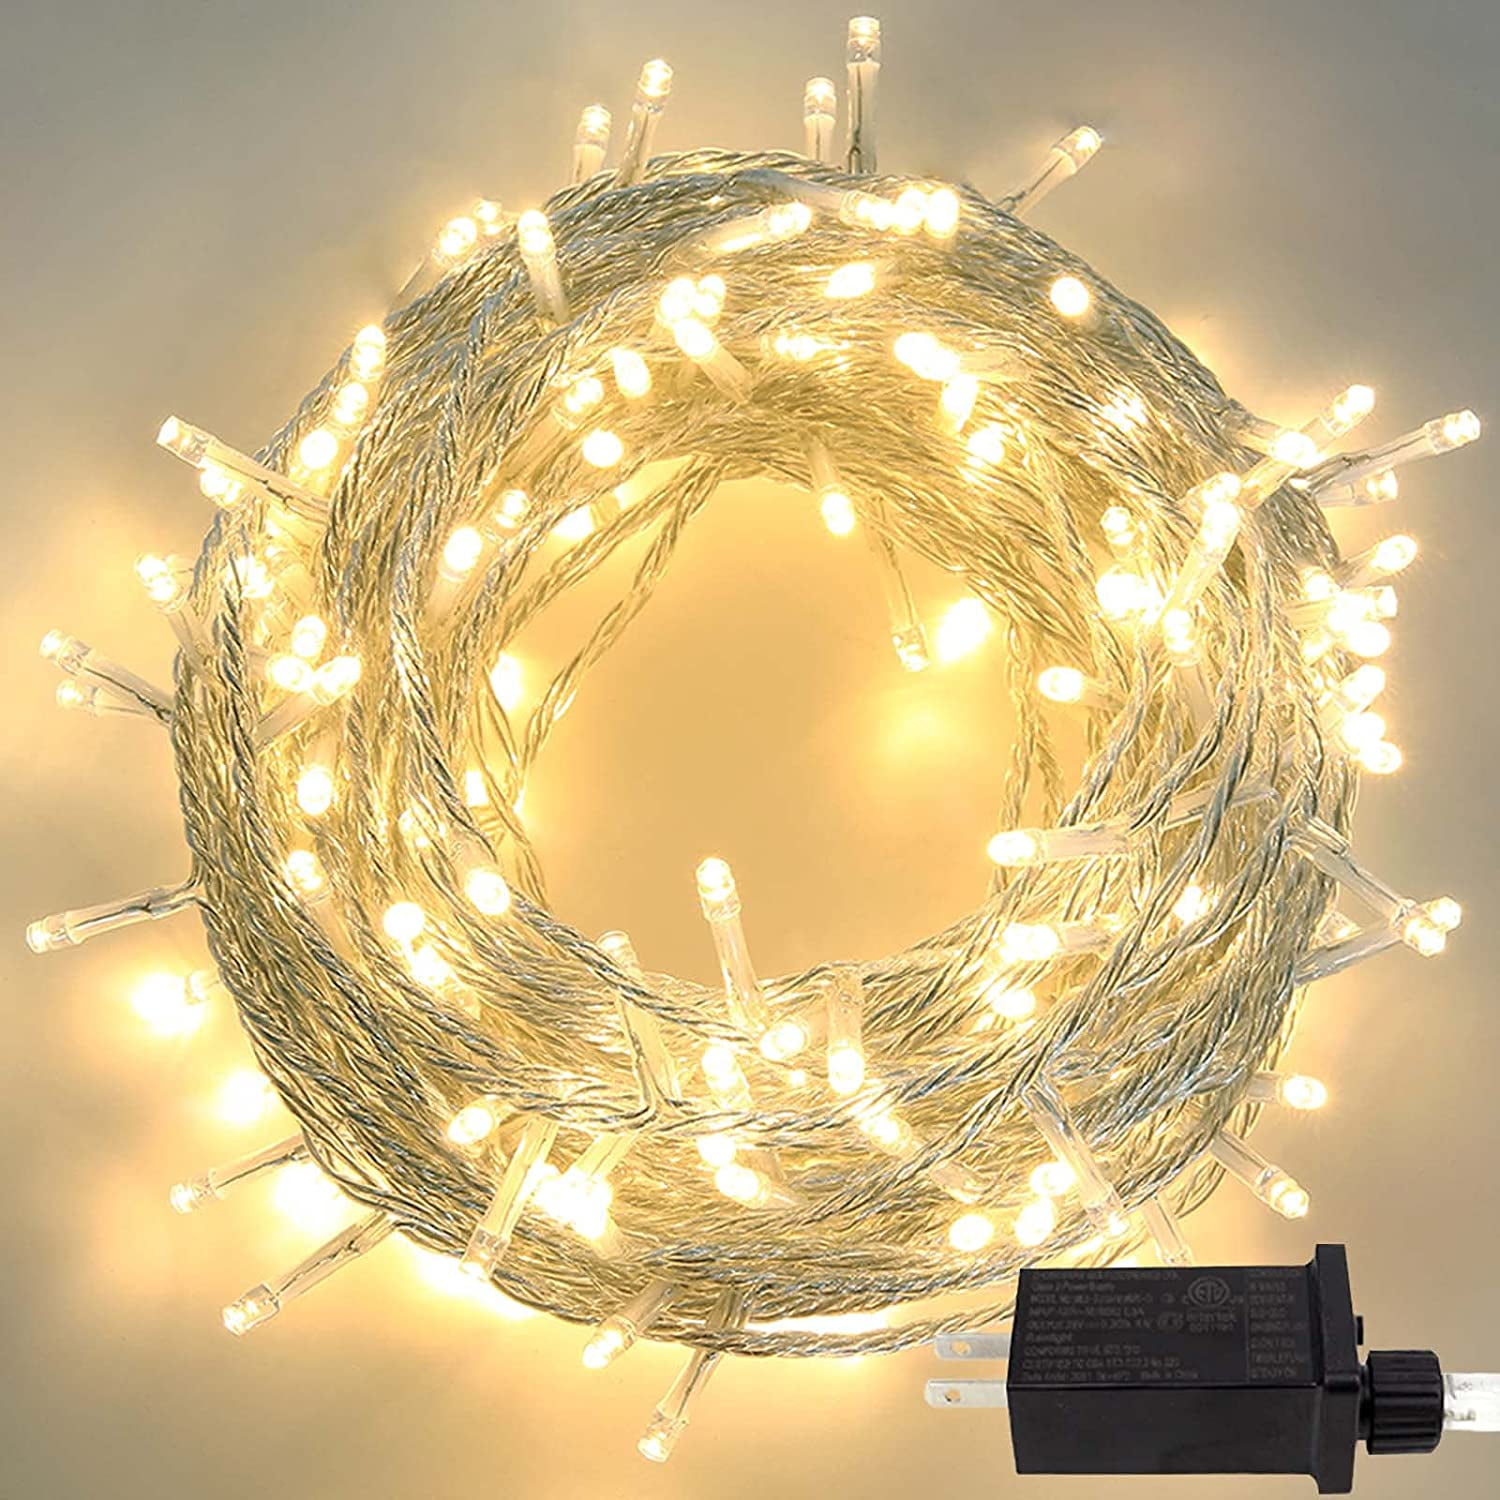 Bright White 200 LED Indoor Outdoor Twinkling Christmas Fairy String Lights 